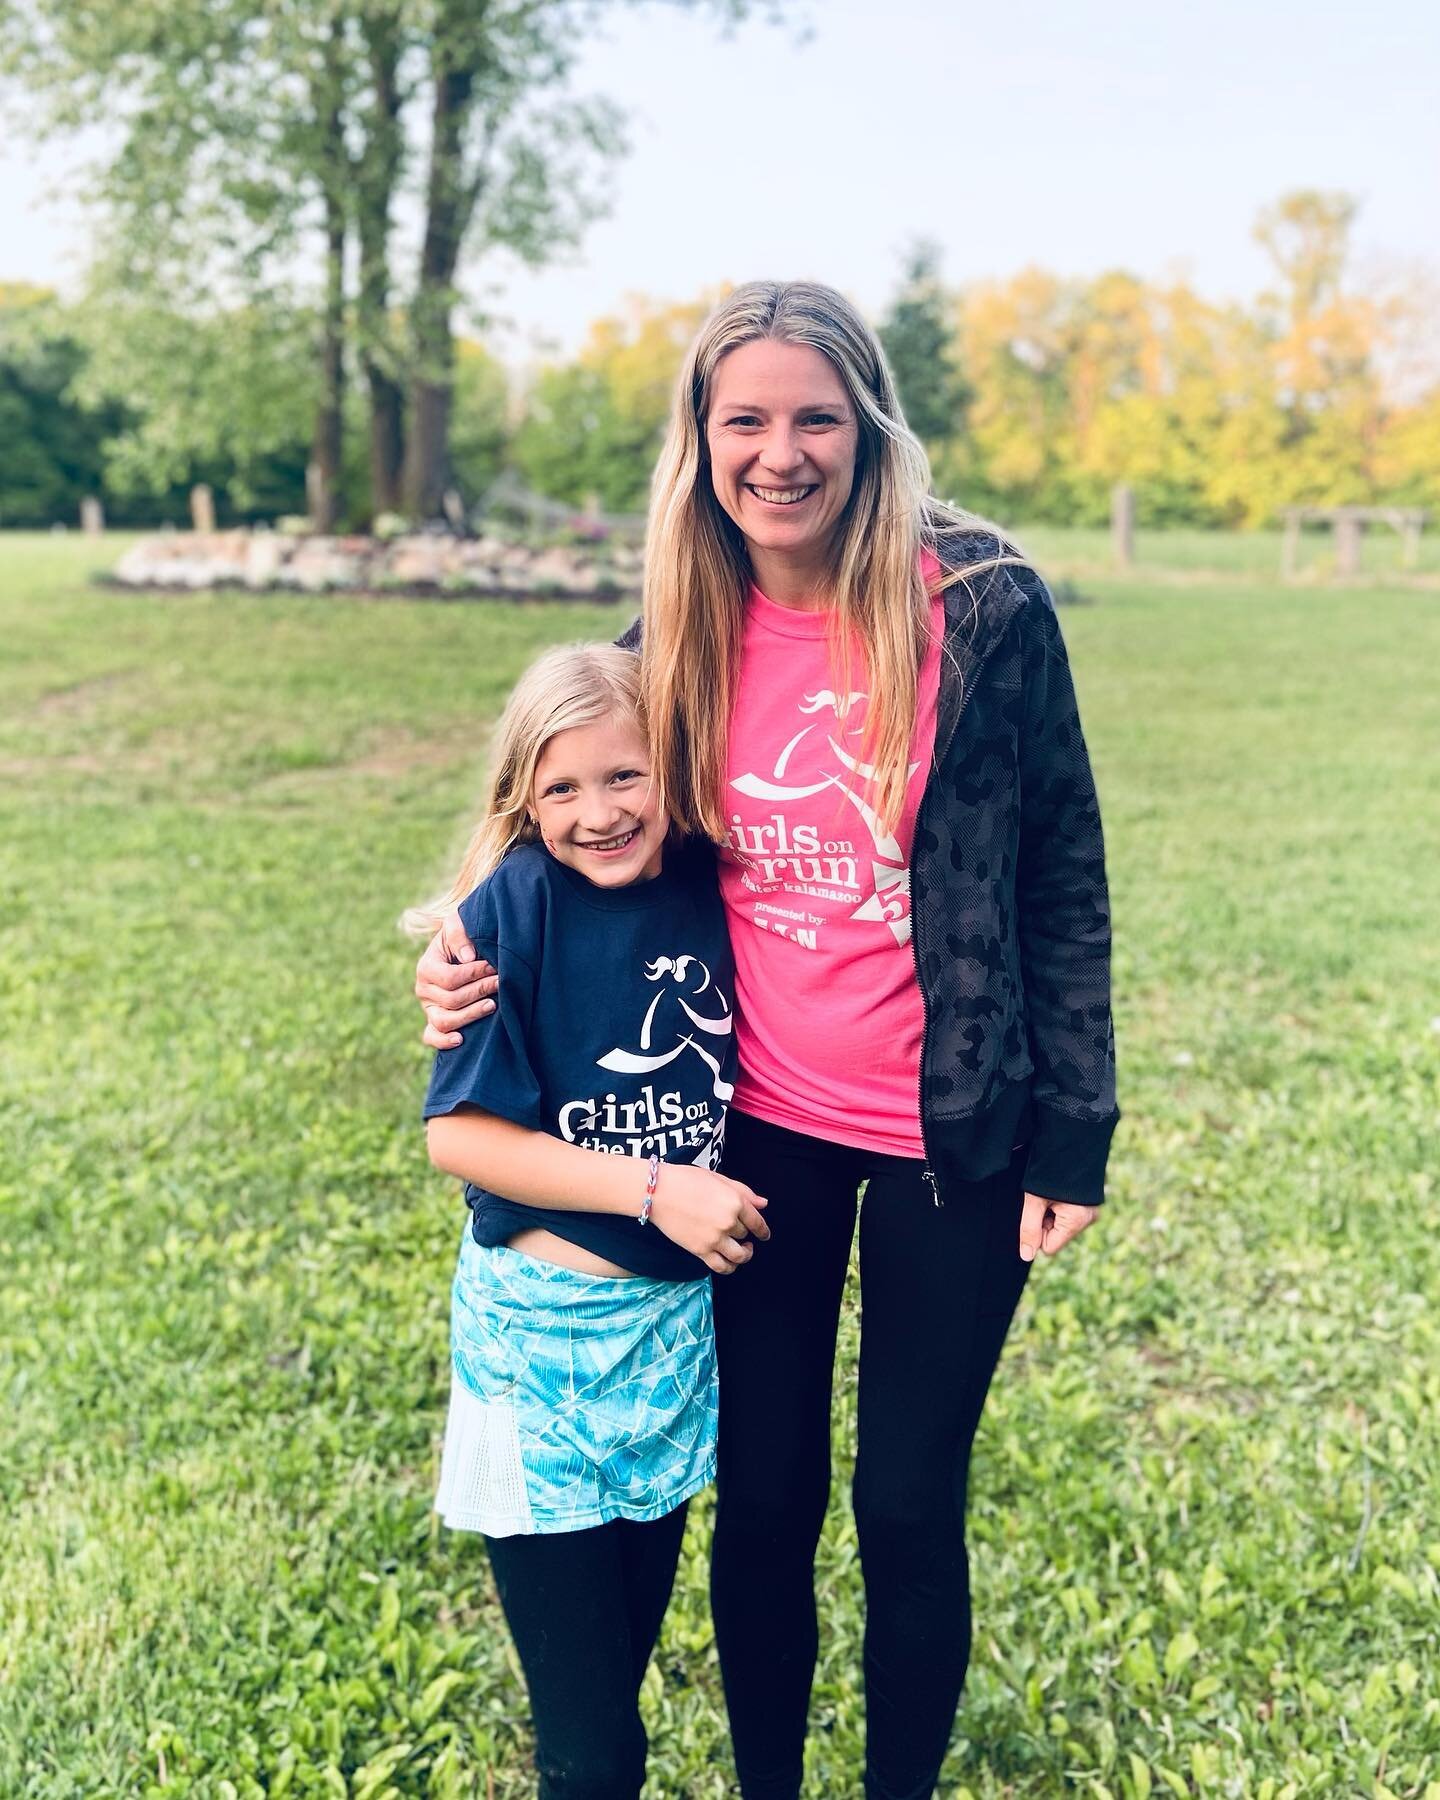 After 10 weeks of training, today was the Girls On The Run 5k race! To say that I am proud is an understatement. I loved coaching this amazing group of girls and running alongside my daughter, Brooklyn! Running has always played a huge role in my lif